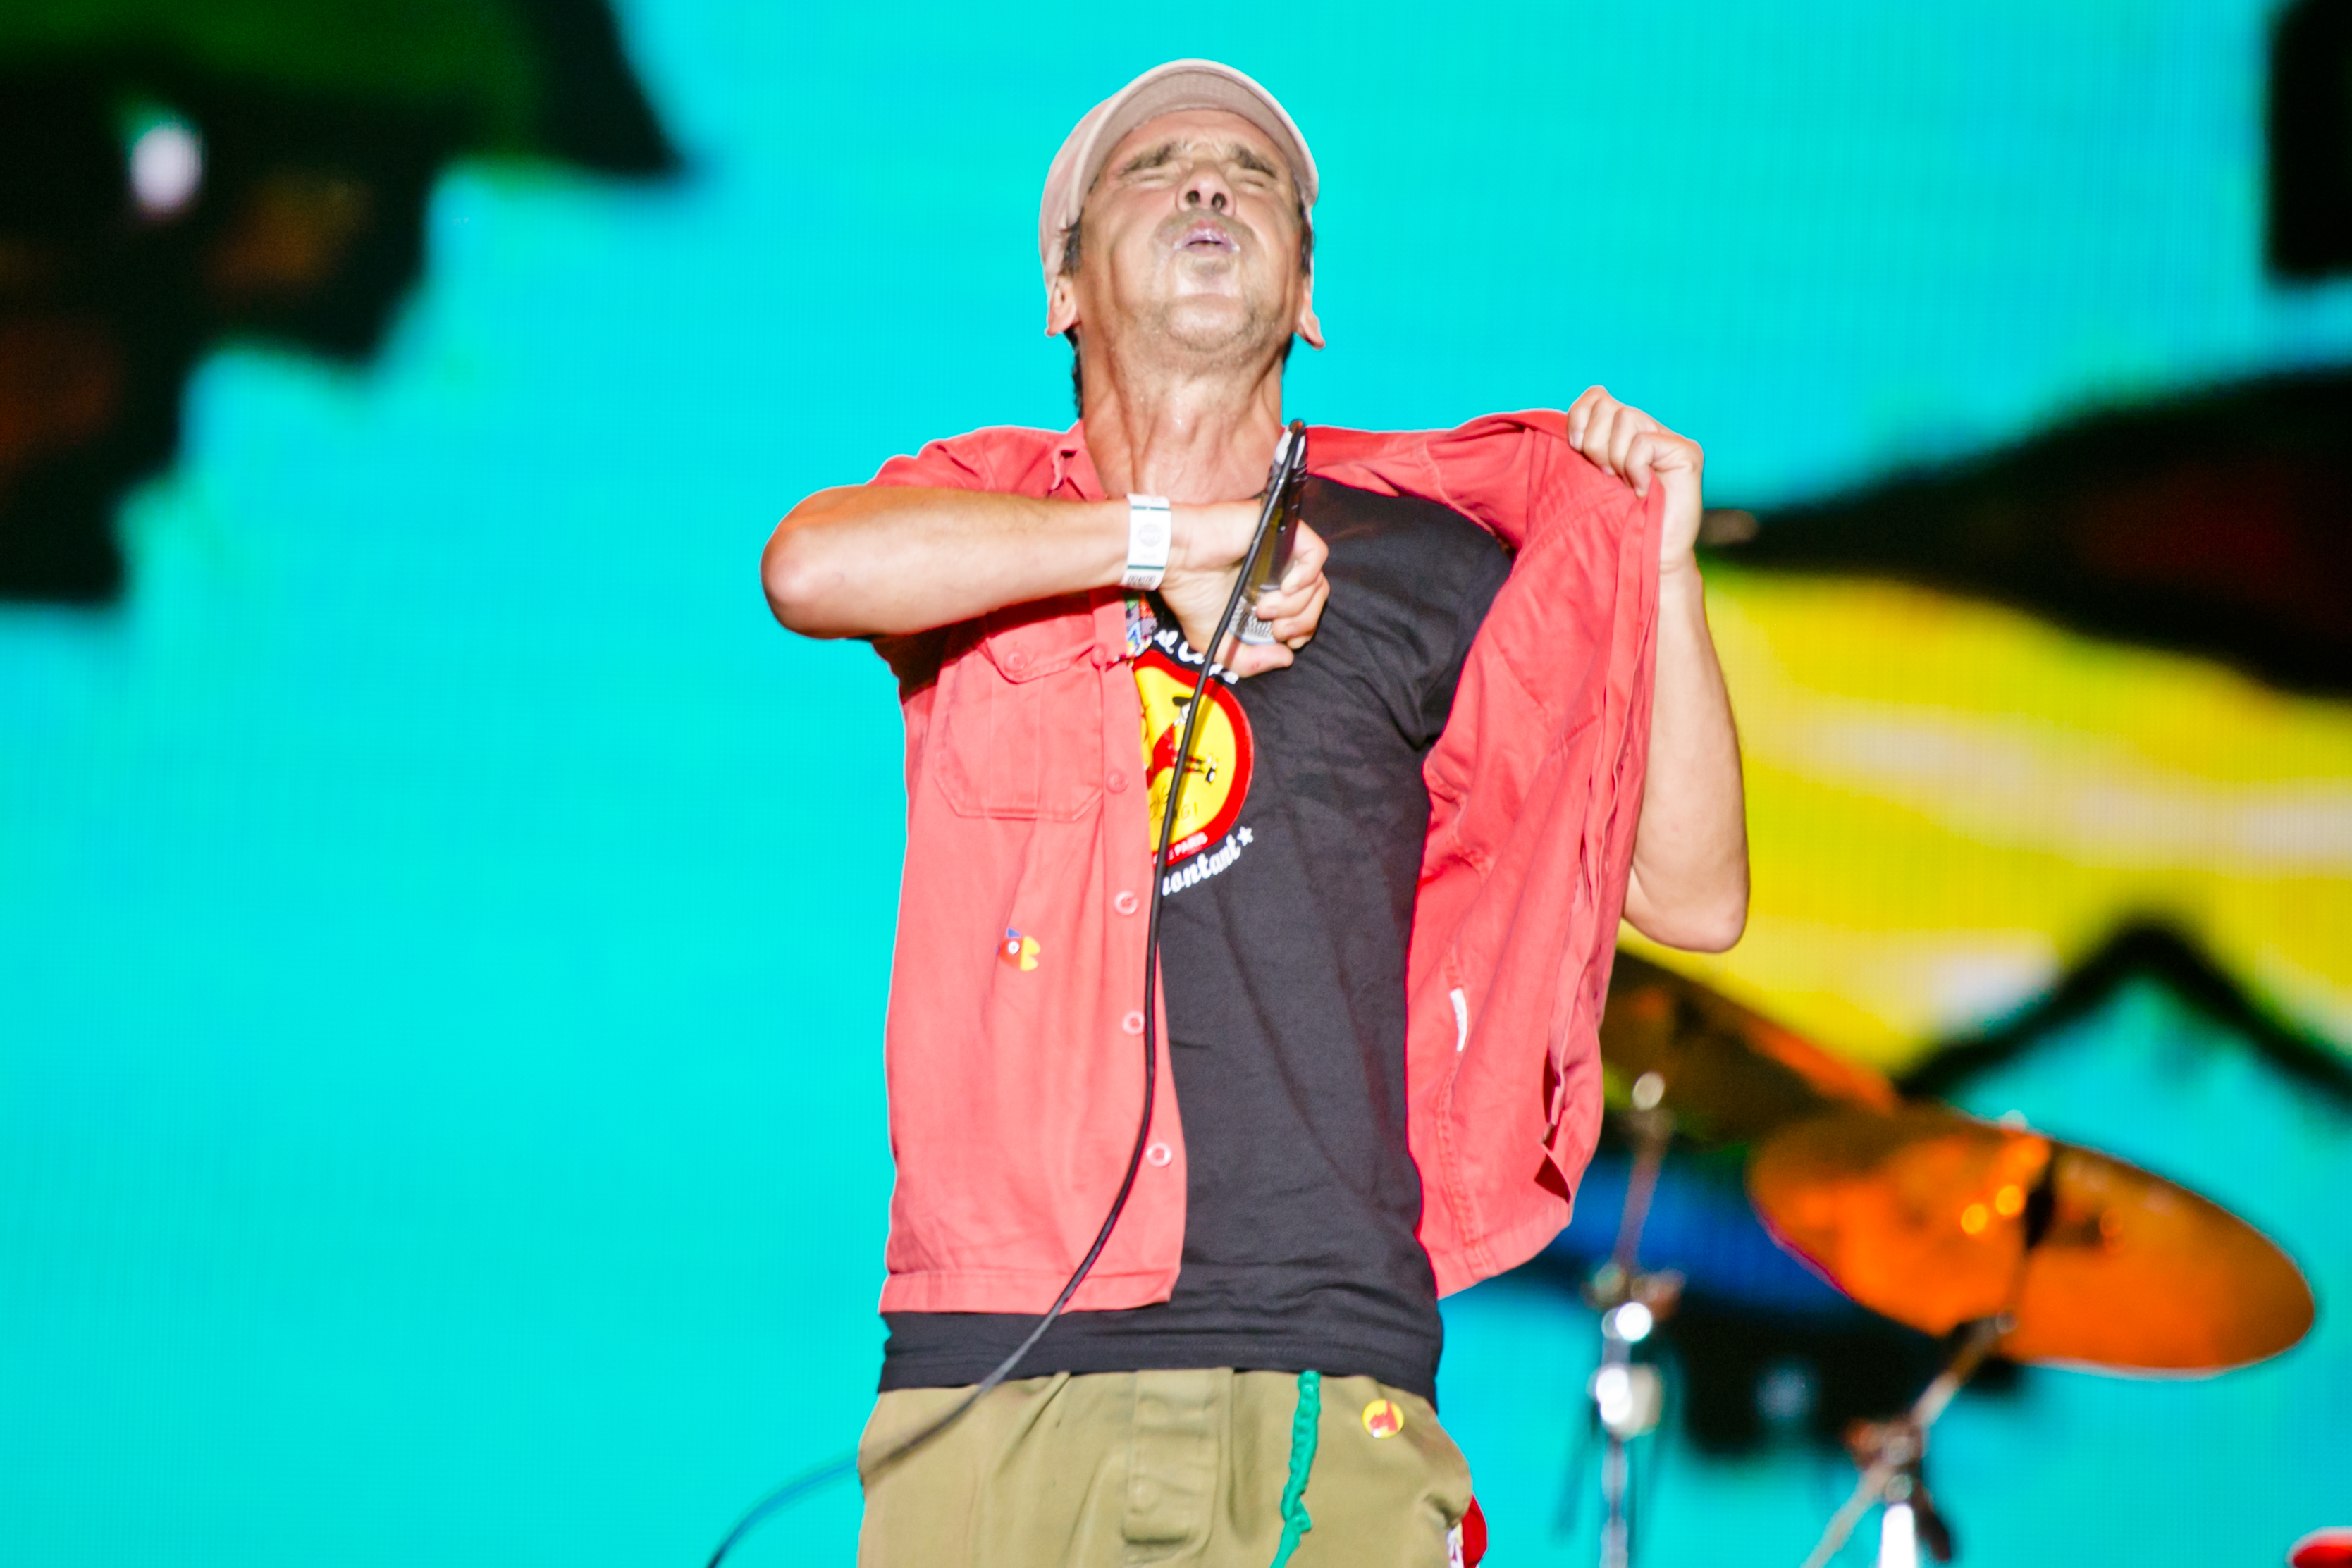 Manu Chao at Sziget Festival, Budapest, Hungary - 12 August 2016